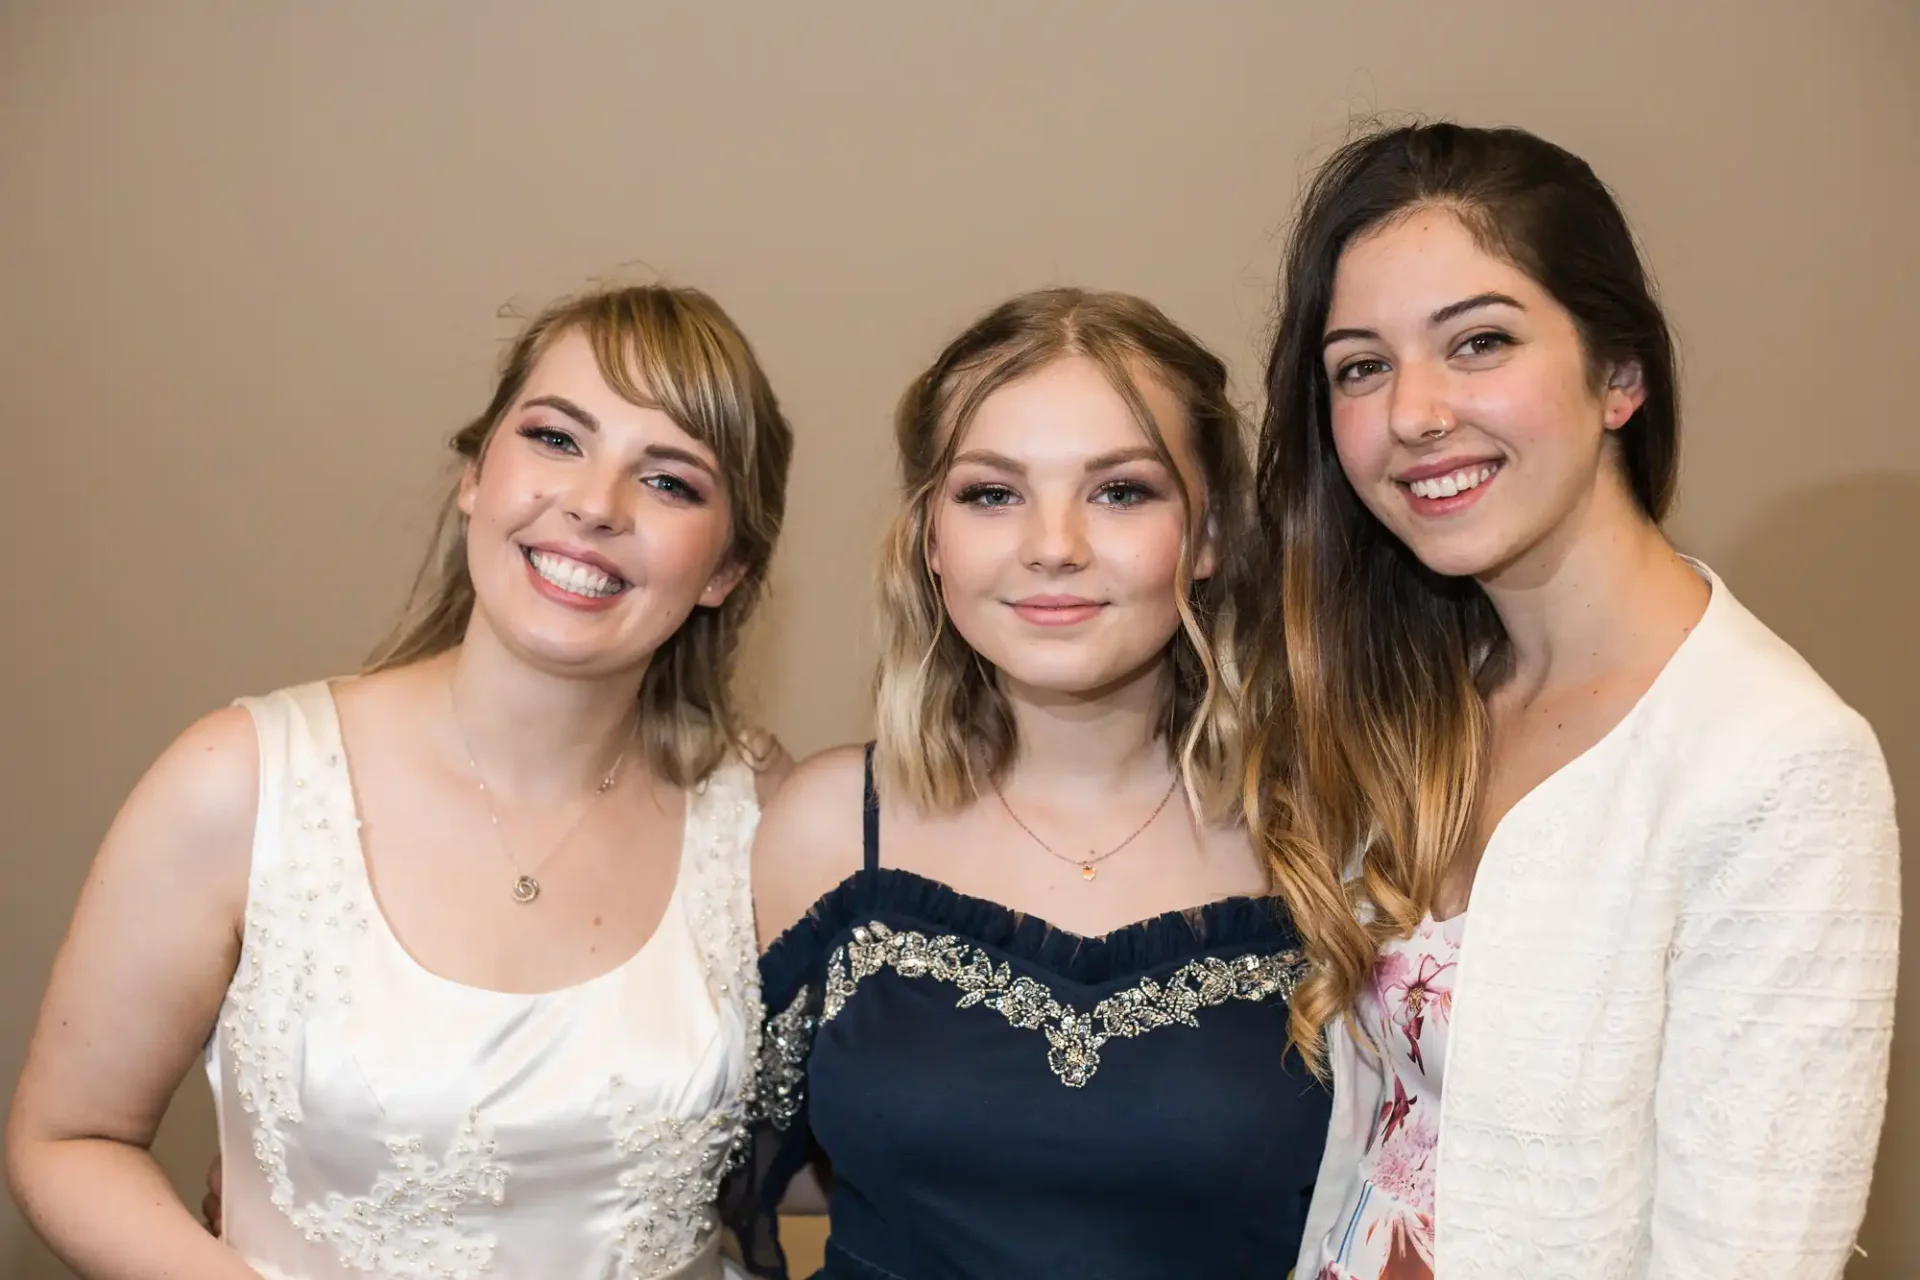 Three young women smiling at the camera, two in white dresses and one in a blue and black dress.